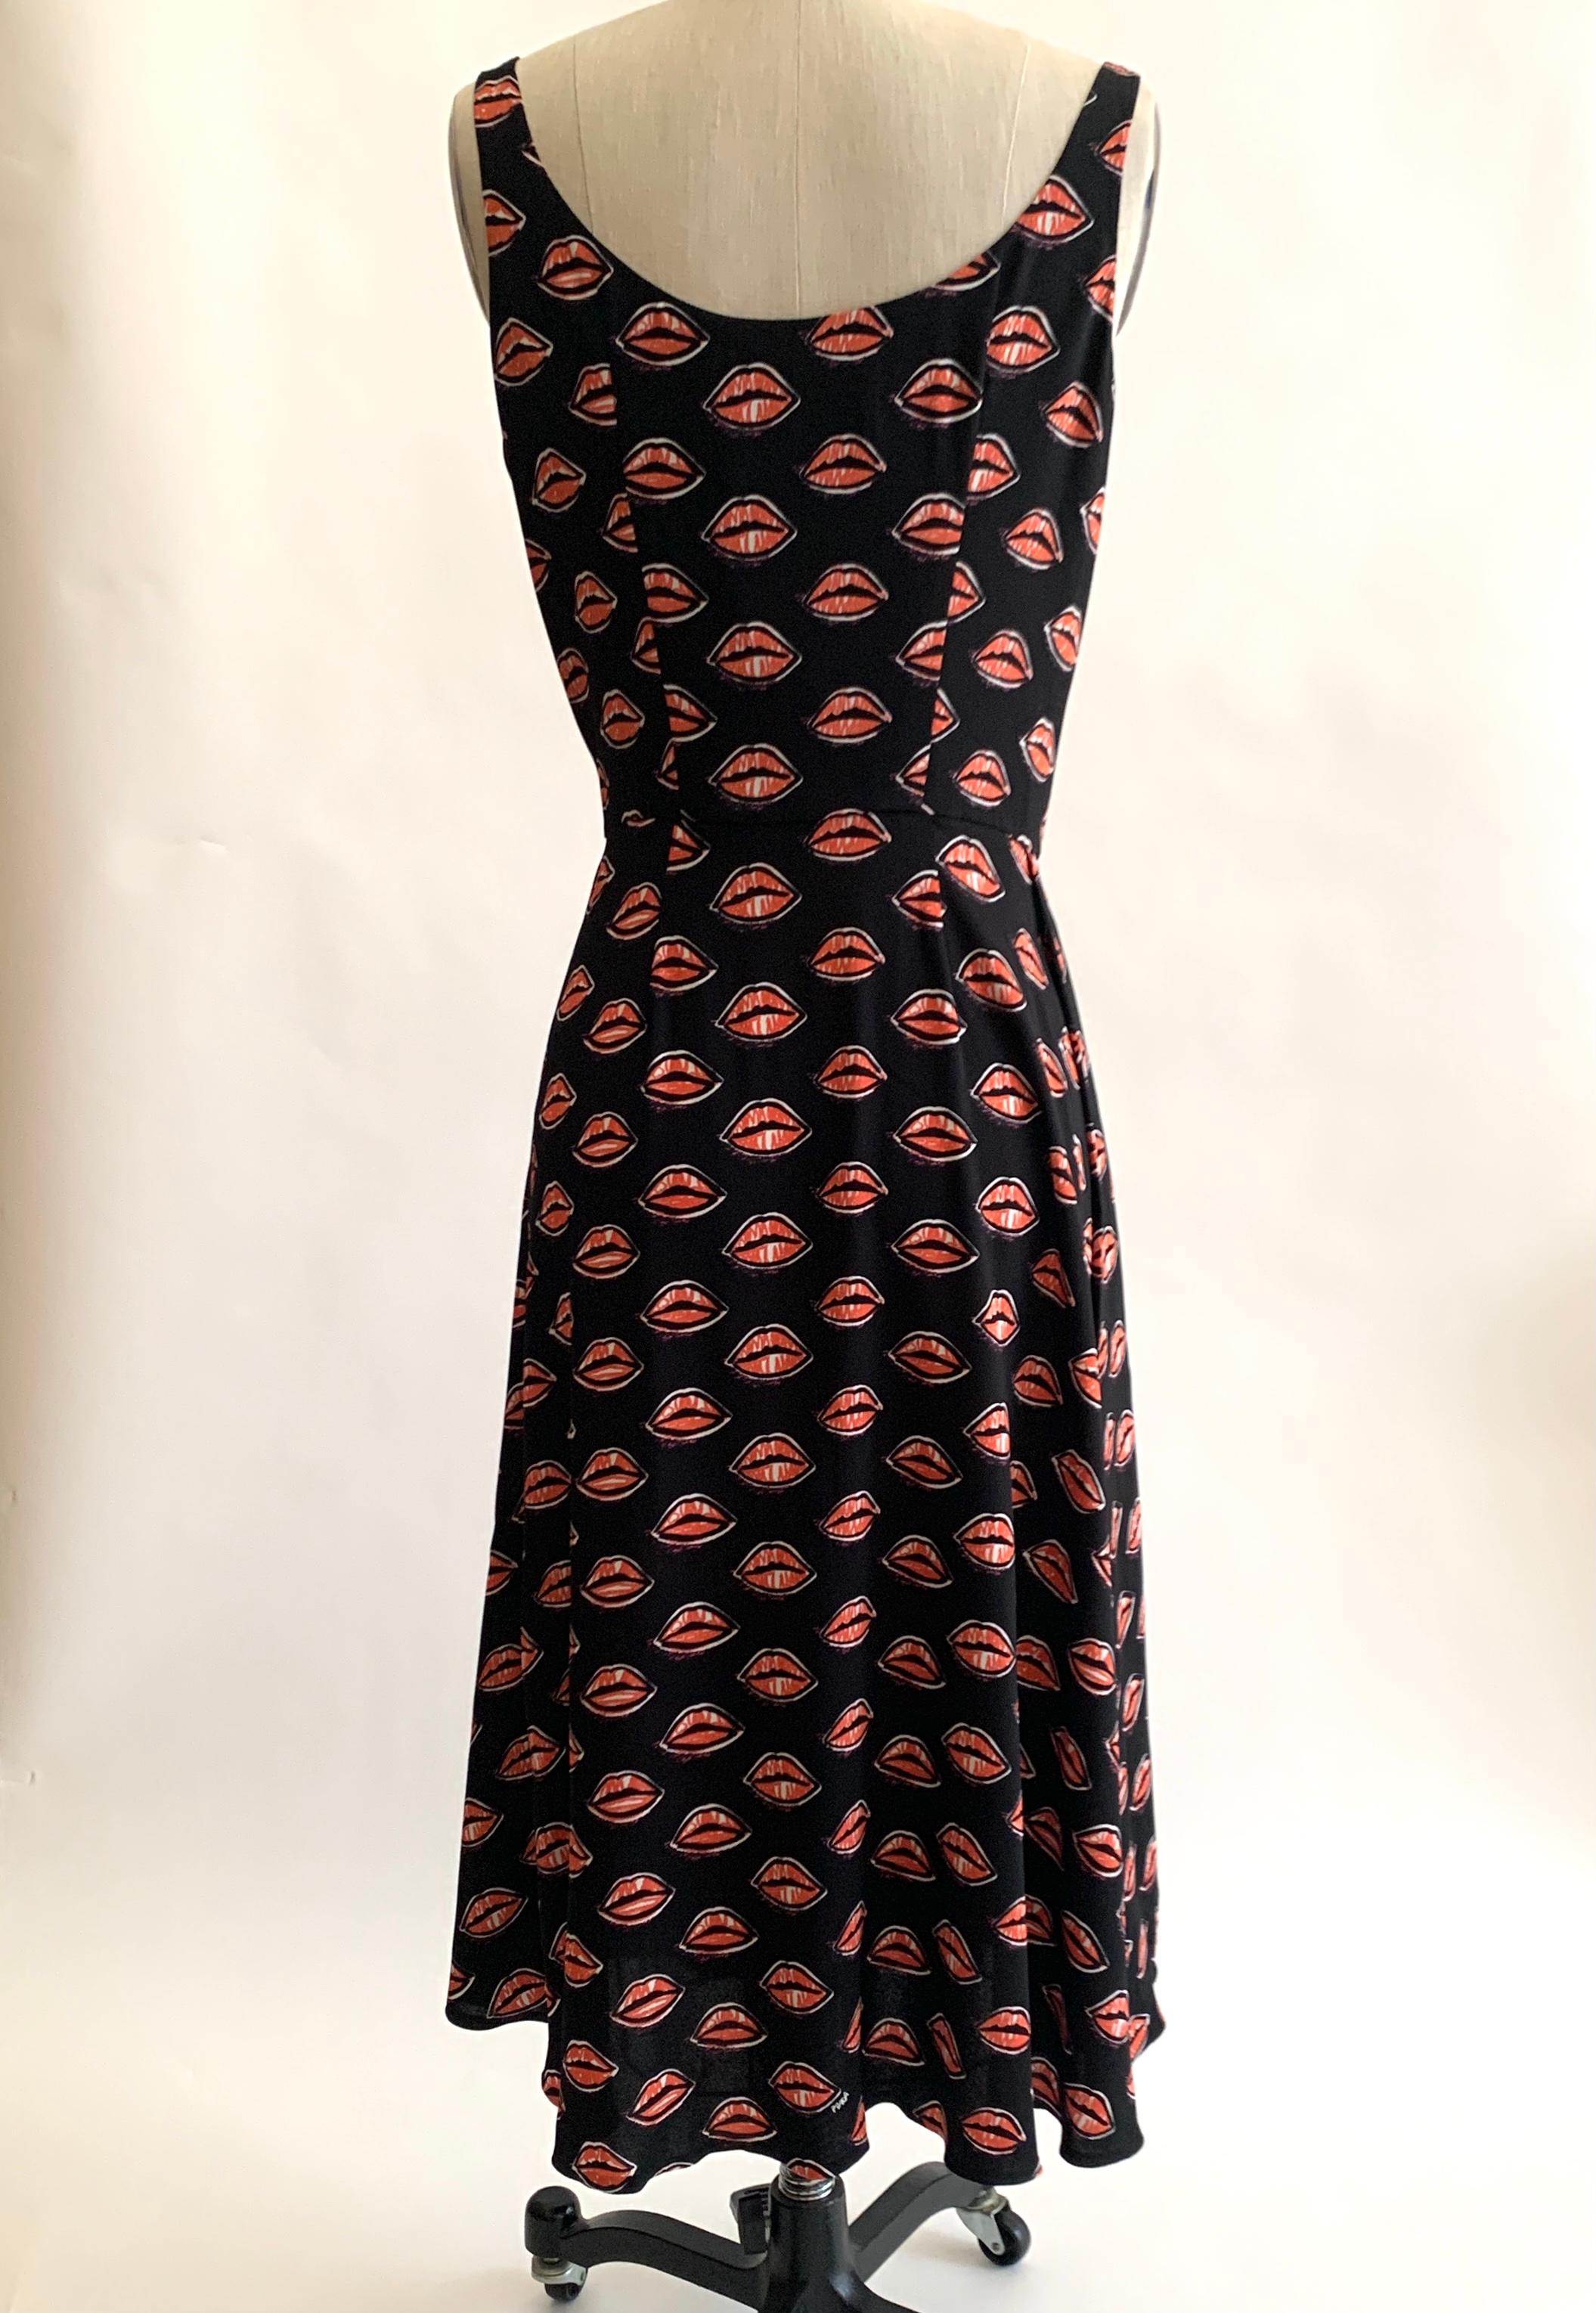 black dress with red lips print